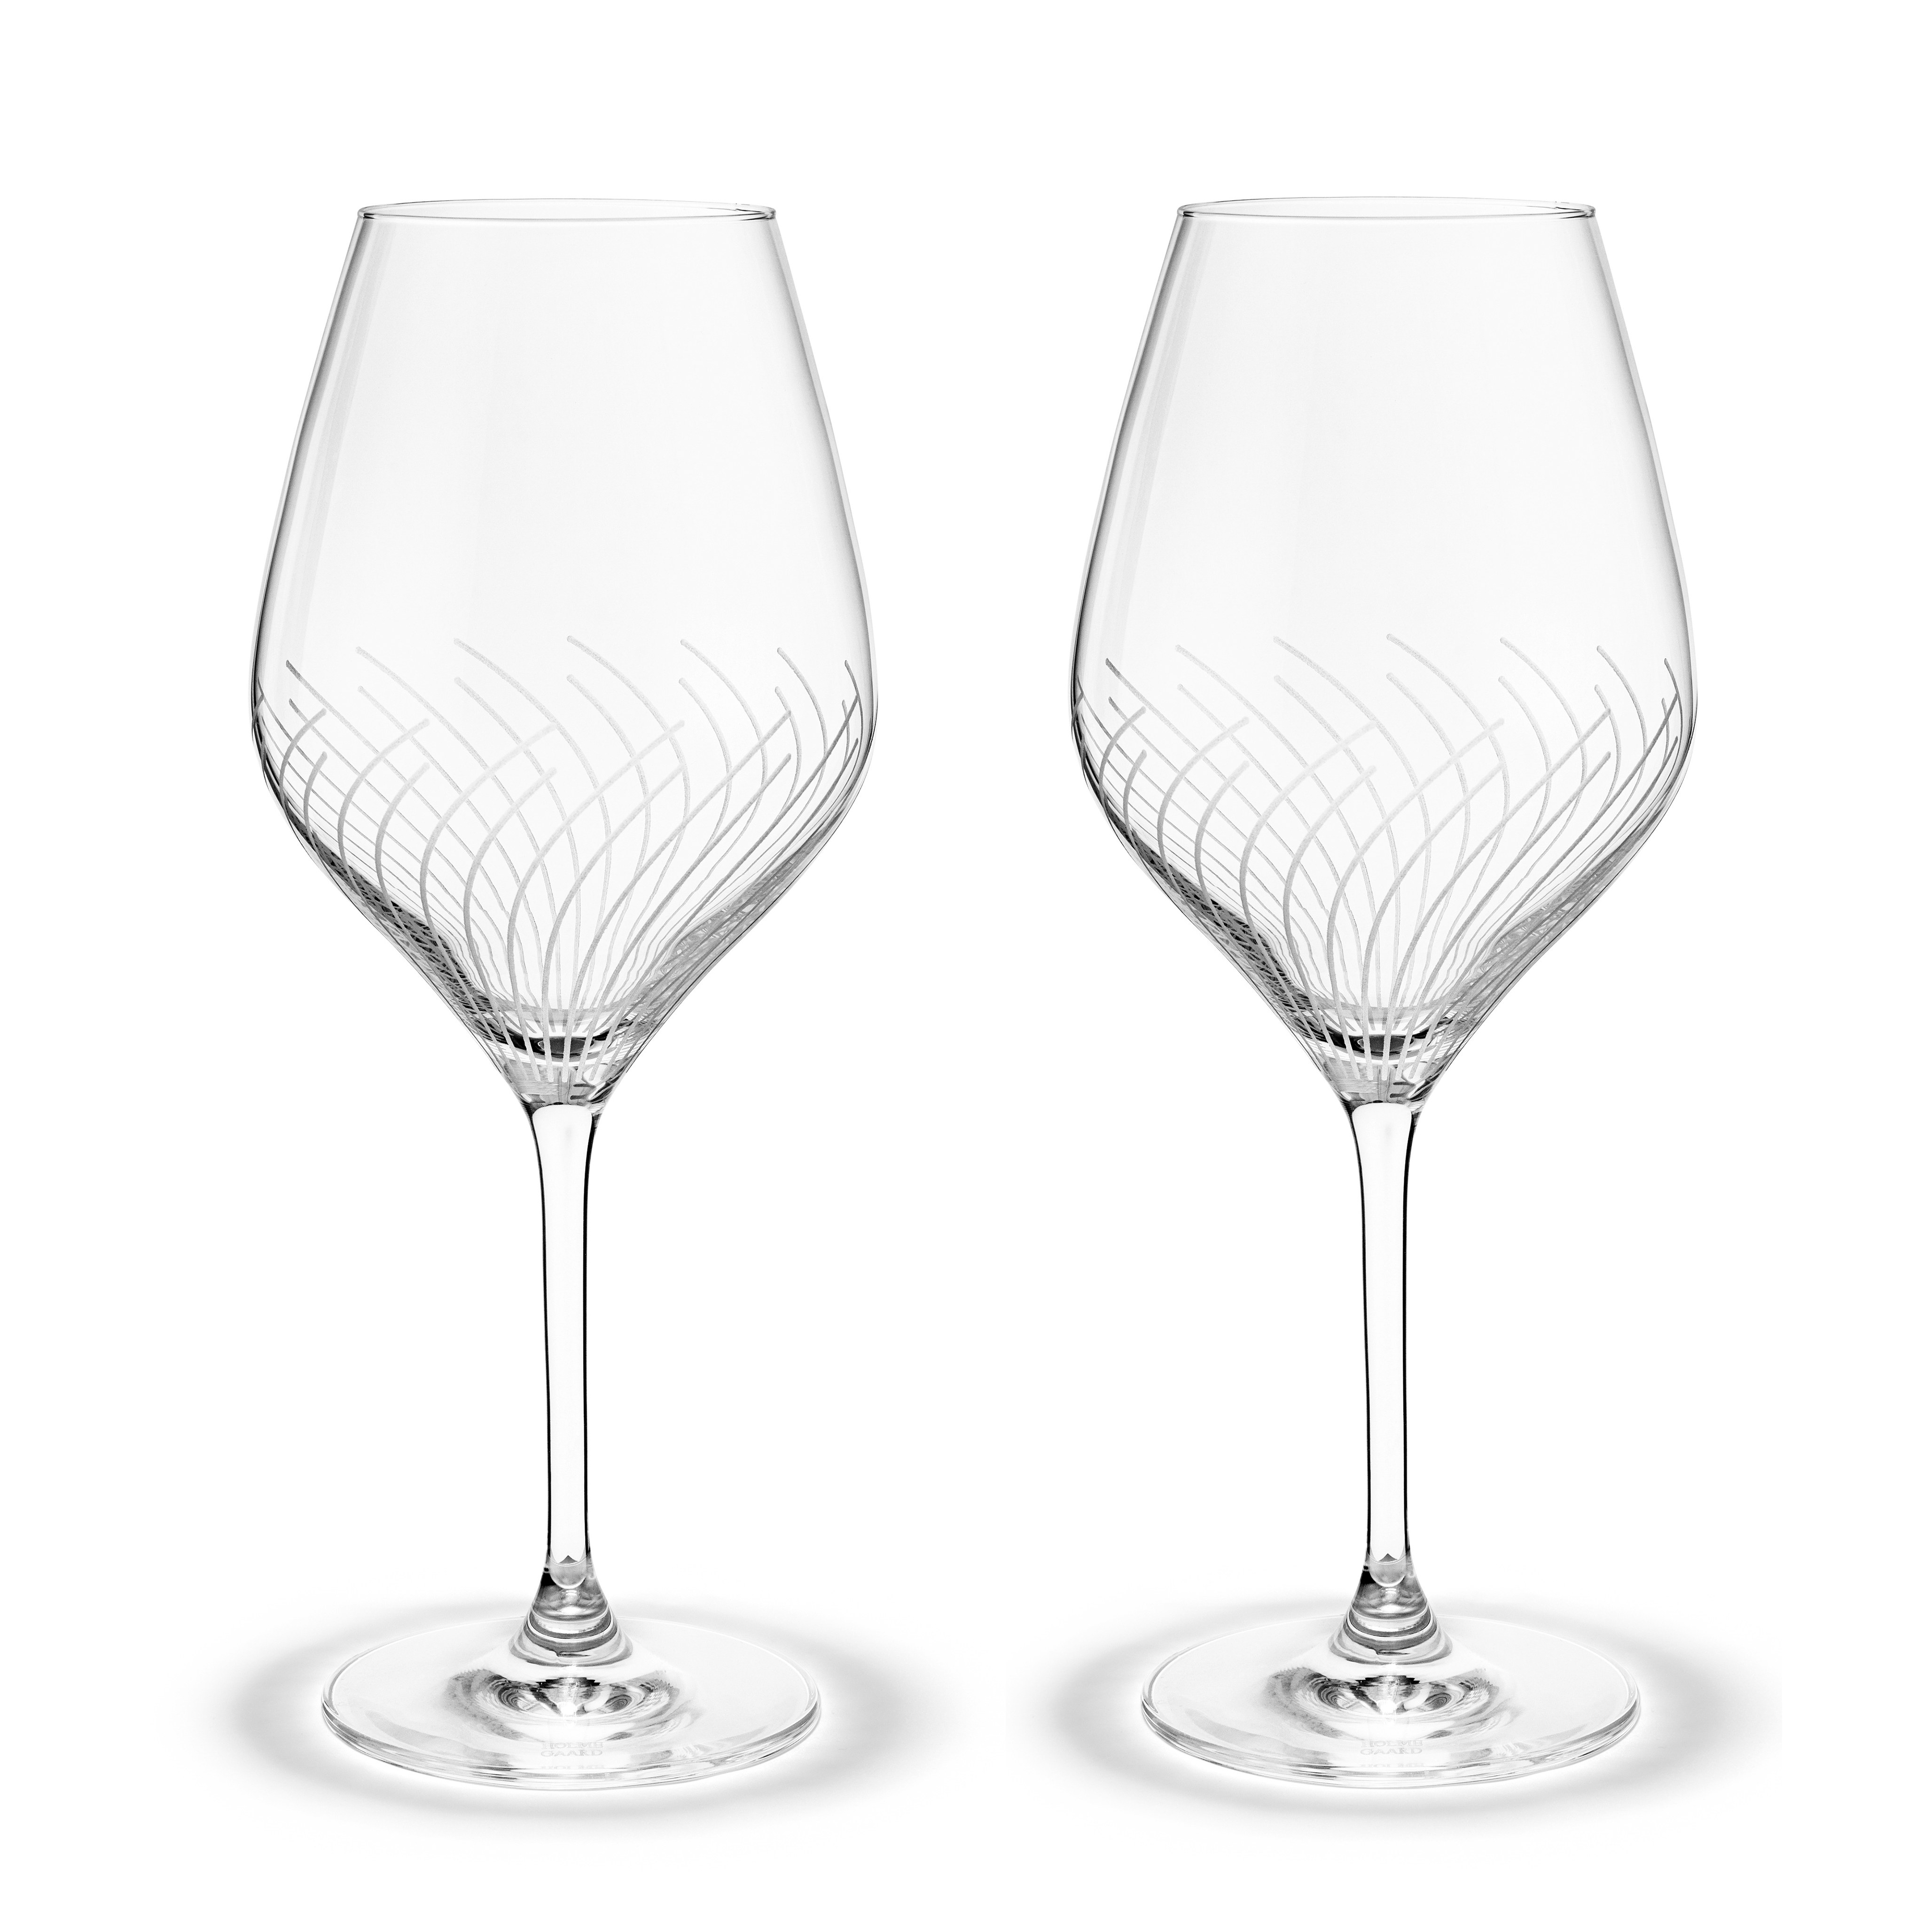 https://www.nordicnest.com/assets/blobs/holmegaard-cabernet-lines-red-wine-glass-52-cl-2-pack-clear/505788-01_1_ProductImageMain-a57b08a537.jpg